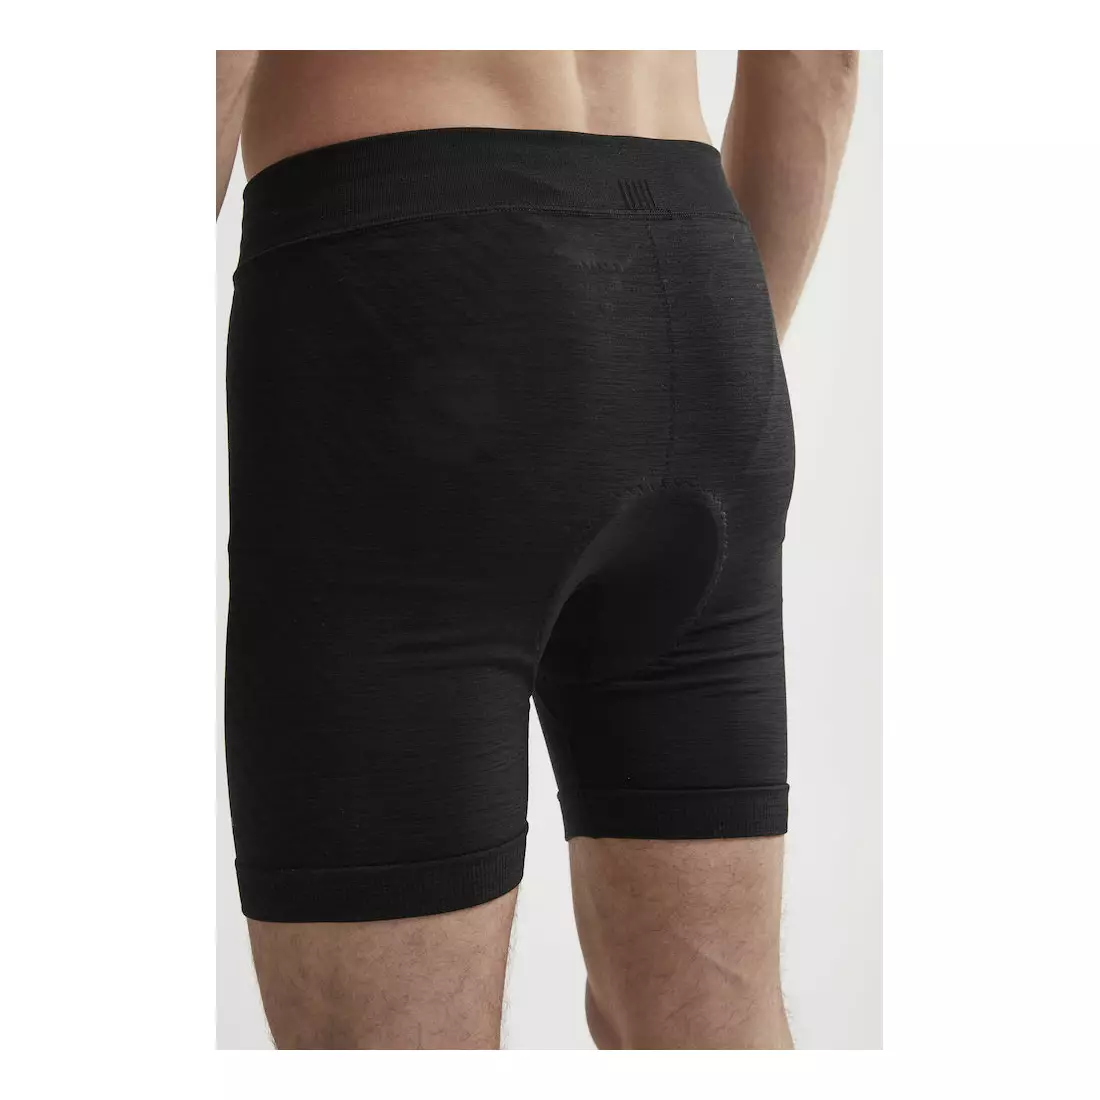 CRAFT FUSEKNIT men's cycling boxer shorts with insert 1907454-999000